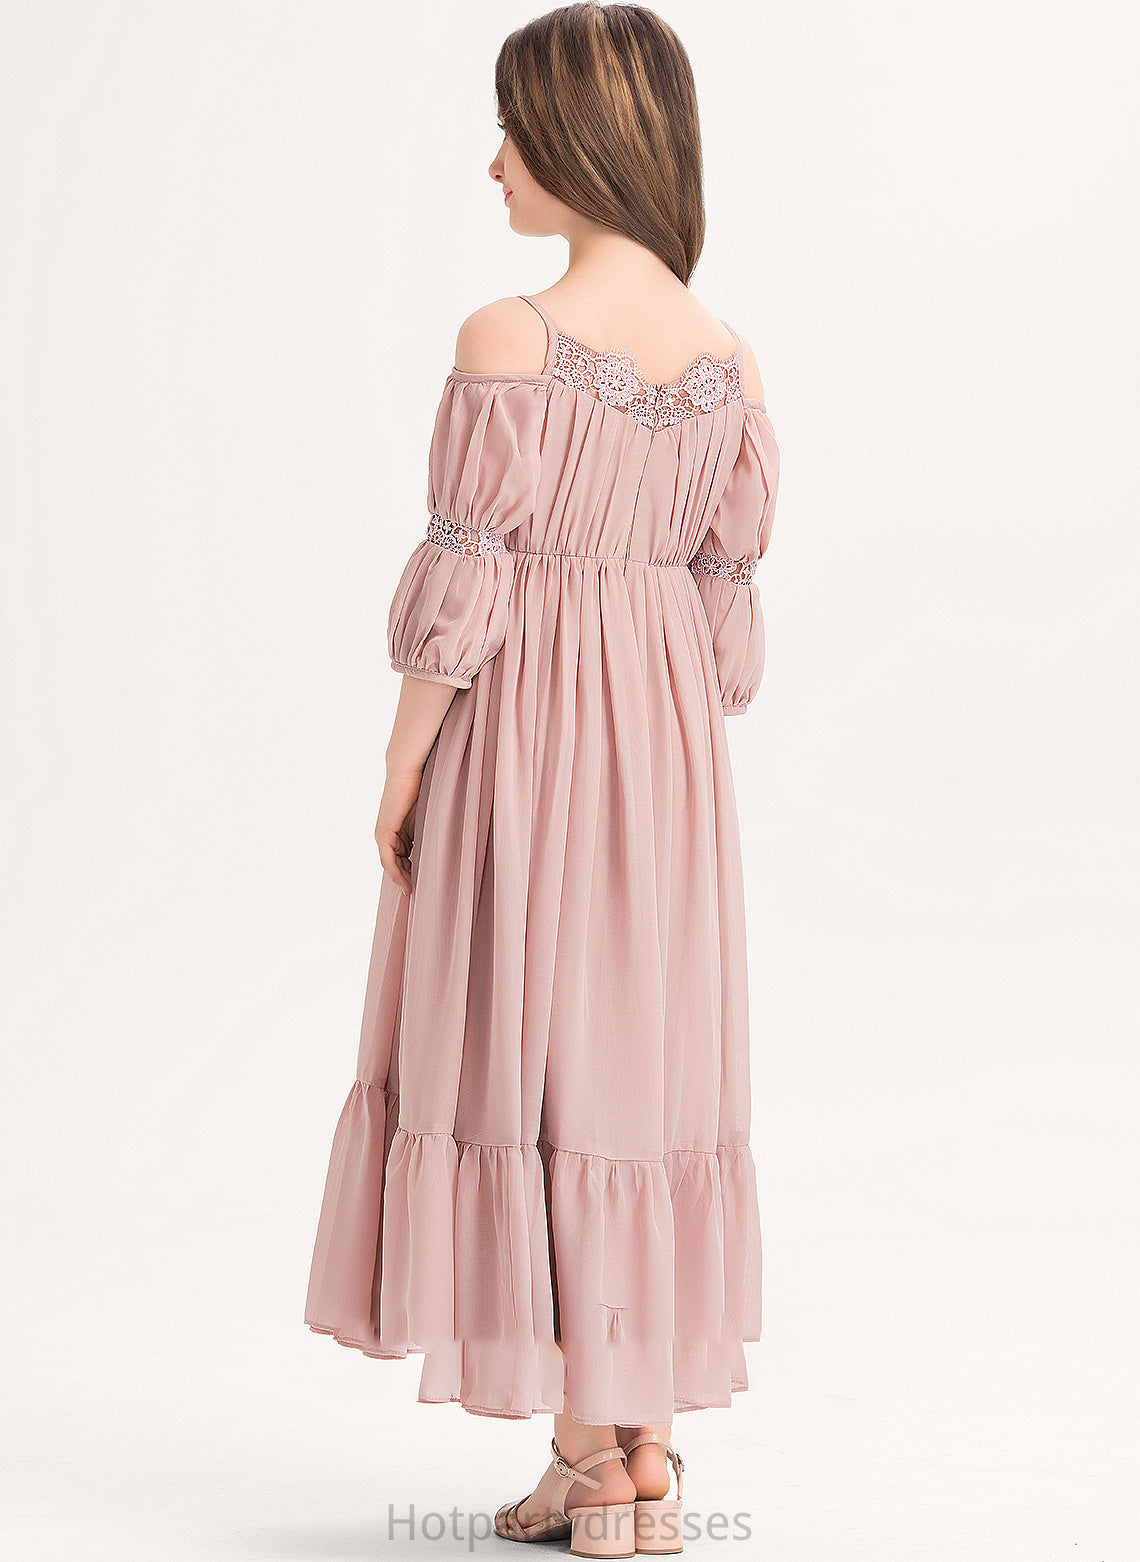 Lace Junior Bridesmaid Dresses Ankle-Length With Ruffle Chiffon A-Line Square Neckline Shelby